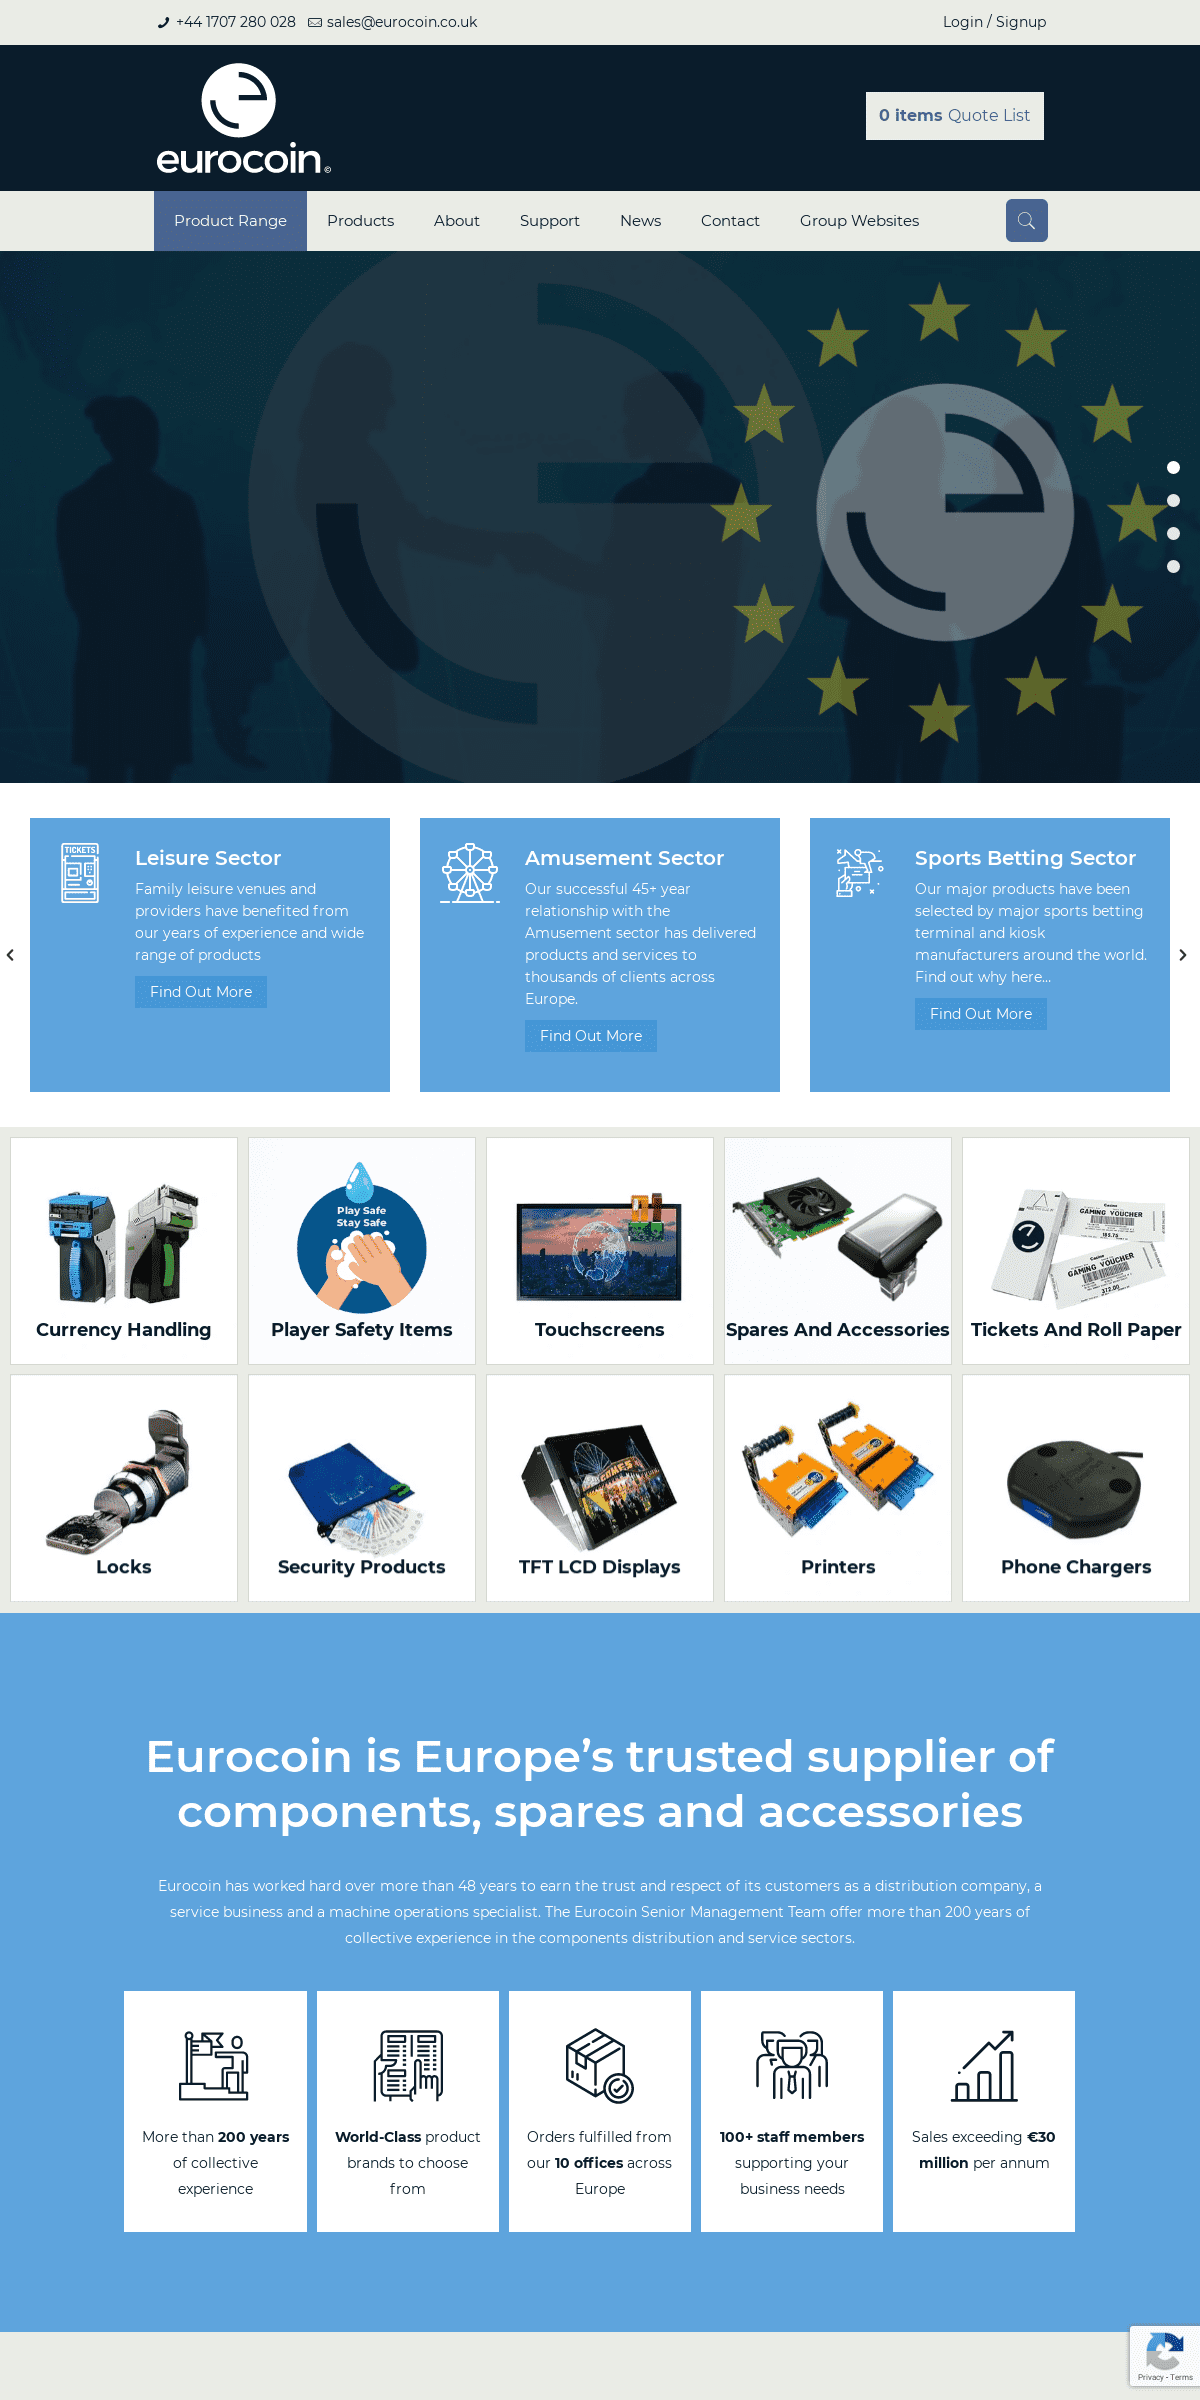 A complete backup of eurocoin.co.uk